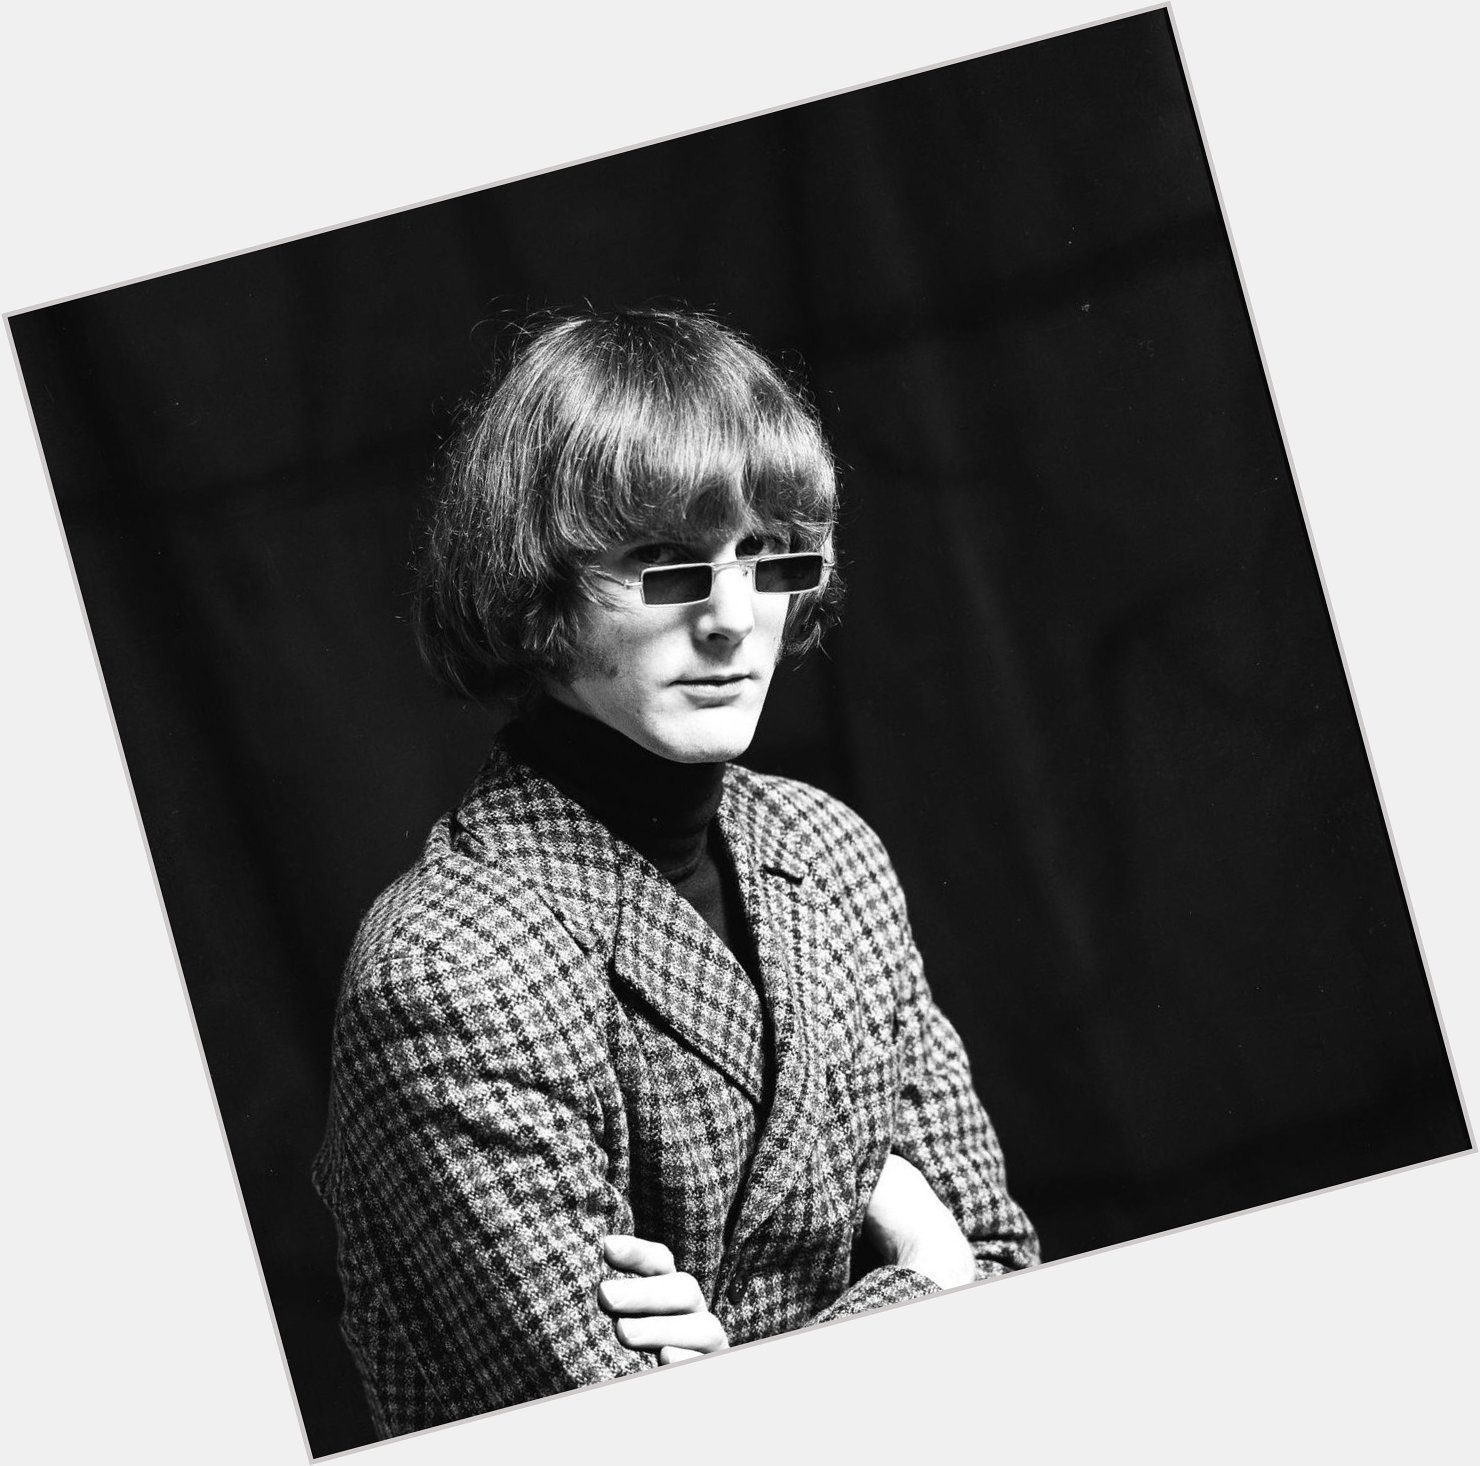 Happy Birthday to The Byrds\ Roger McGuinn. 

More on Roger on the 